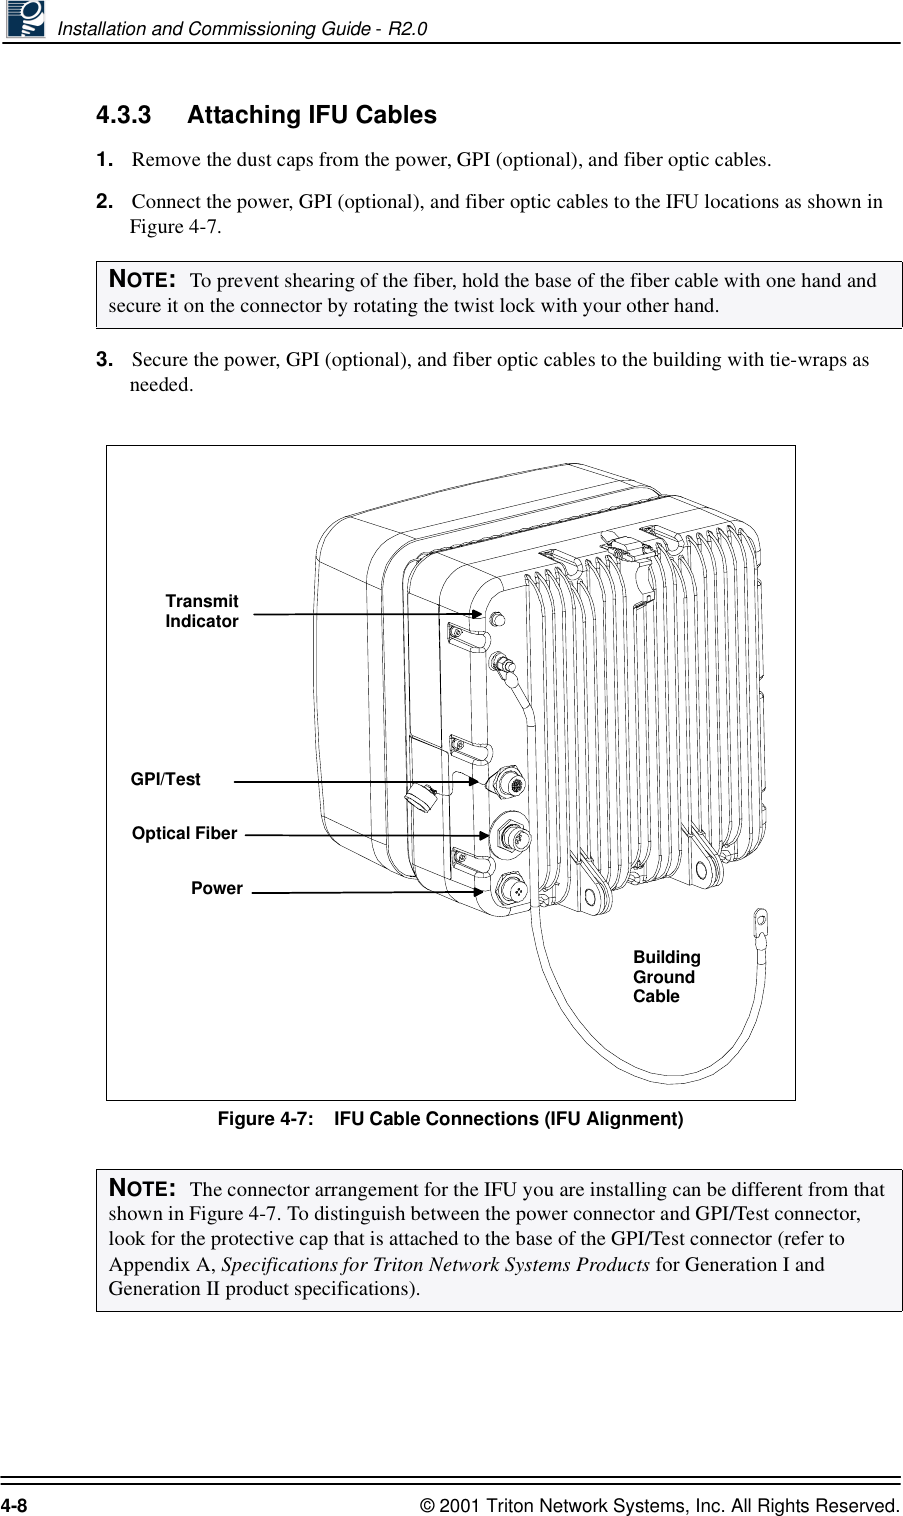  Installation and Commissioning Guide - R2.04-8 © 2001 Triton Network Systems, Inc. All Rights Reserved.4.3.3 Attaching IFU Cables1. Remove the dust caps from the power, GPI (optional), and fiber optic cables.2. Connect the power, GPI (optional), and fiber optic cables to the IFU locations as shown in Figure 4-7. 3. Secure the power, GPI (optional), and fiber optic cables to the building with tie-wraps as needed.Figure 4-7:    IFU Cable Connections (IFU Alignment)NOTE:  To prevent shearing of the fiber, hold the base of the fiber cable with one hand and secure it on the connector by rotating the twist lock with your other hand. NOTE:  The connector arrangement for the IFU you are installing can be different from that shown in Figure 4-7. To distinguish between the power connector and GPI/Test connector, look for the protective cap that is attached to the base of the GPI/Test connector (refer to Appendix A, Specifications for Triton Network Systems Products for Generation I and Generation II product specifications).TransmitIndicatorOptical FiberPowerGPI/TestBuildingGroundCable